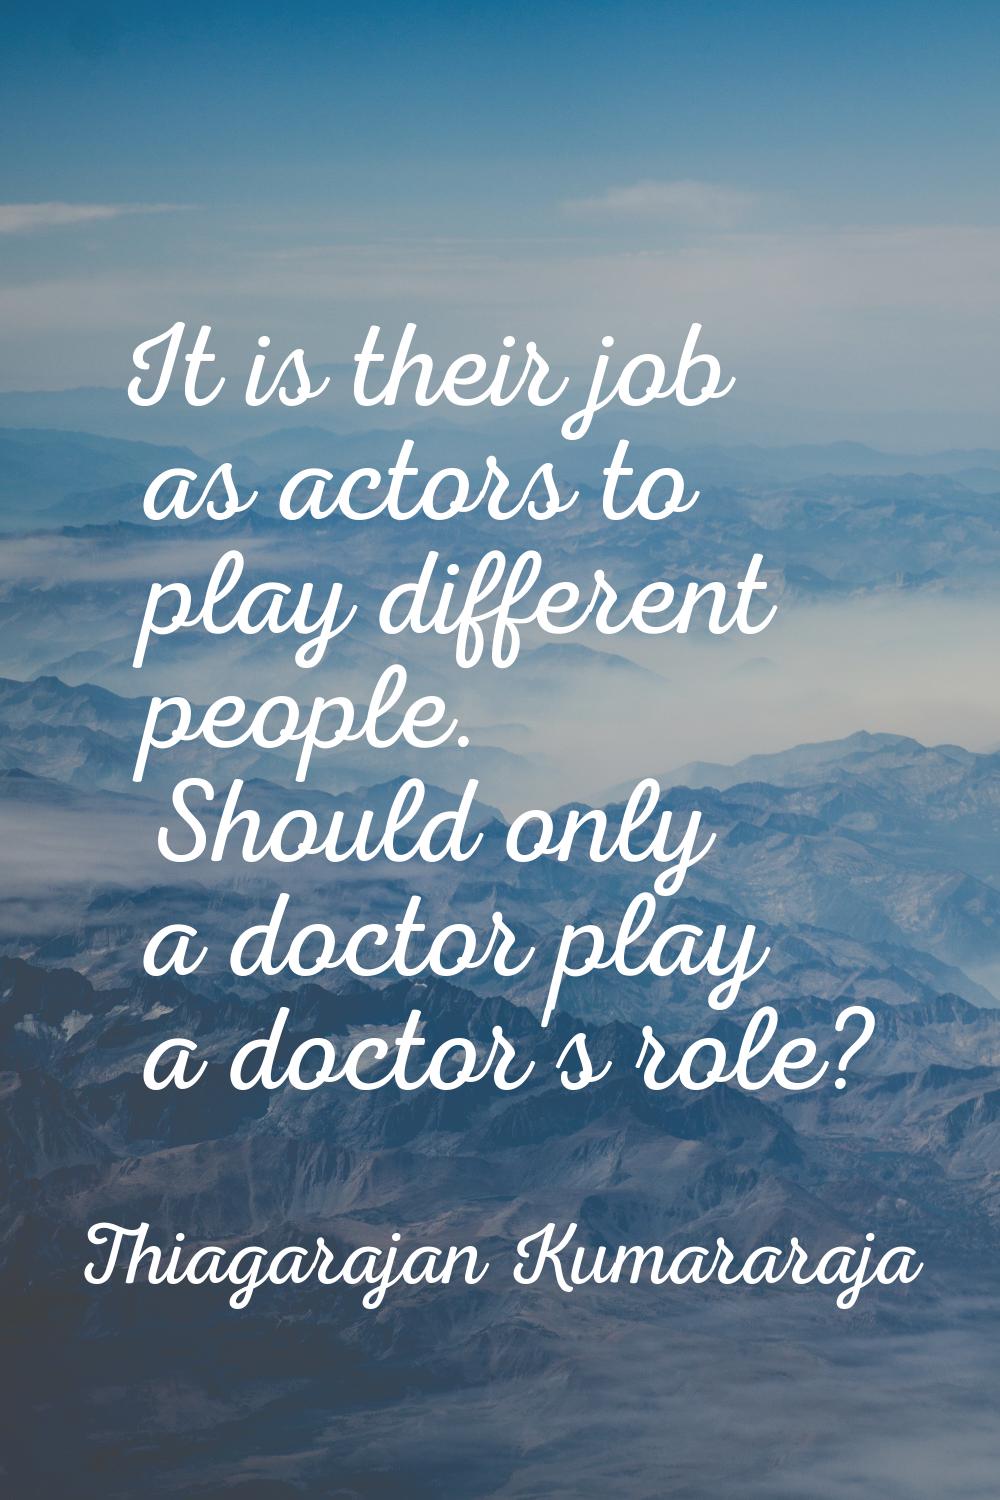 It is their job as actors to play different people. Should only a doctor play a doctor's role?